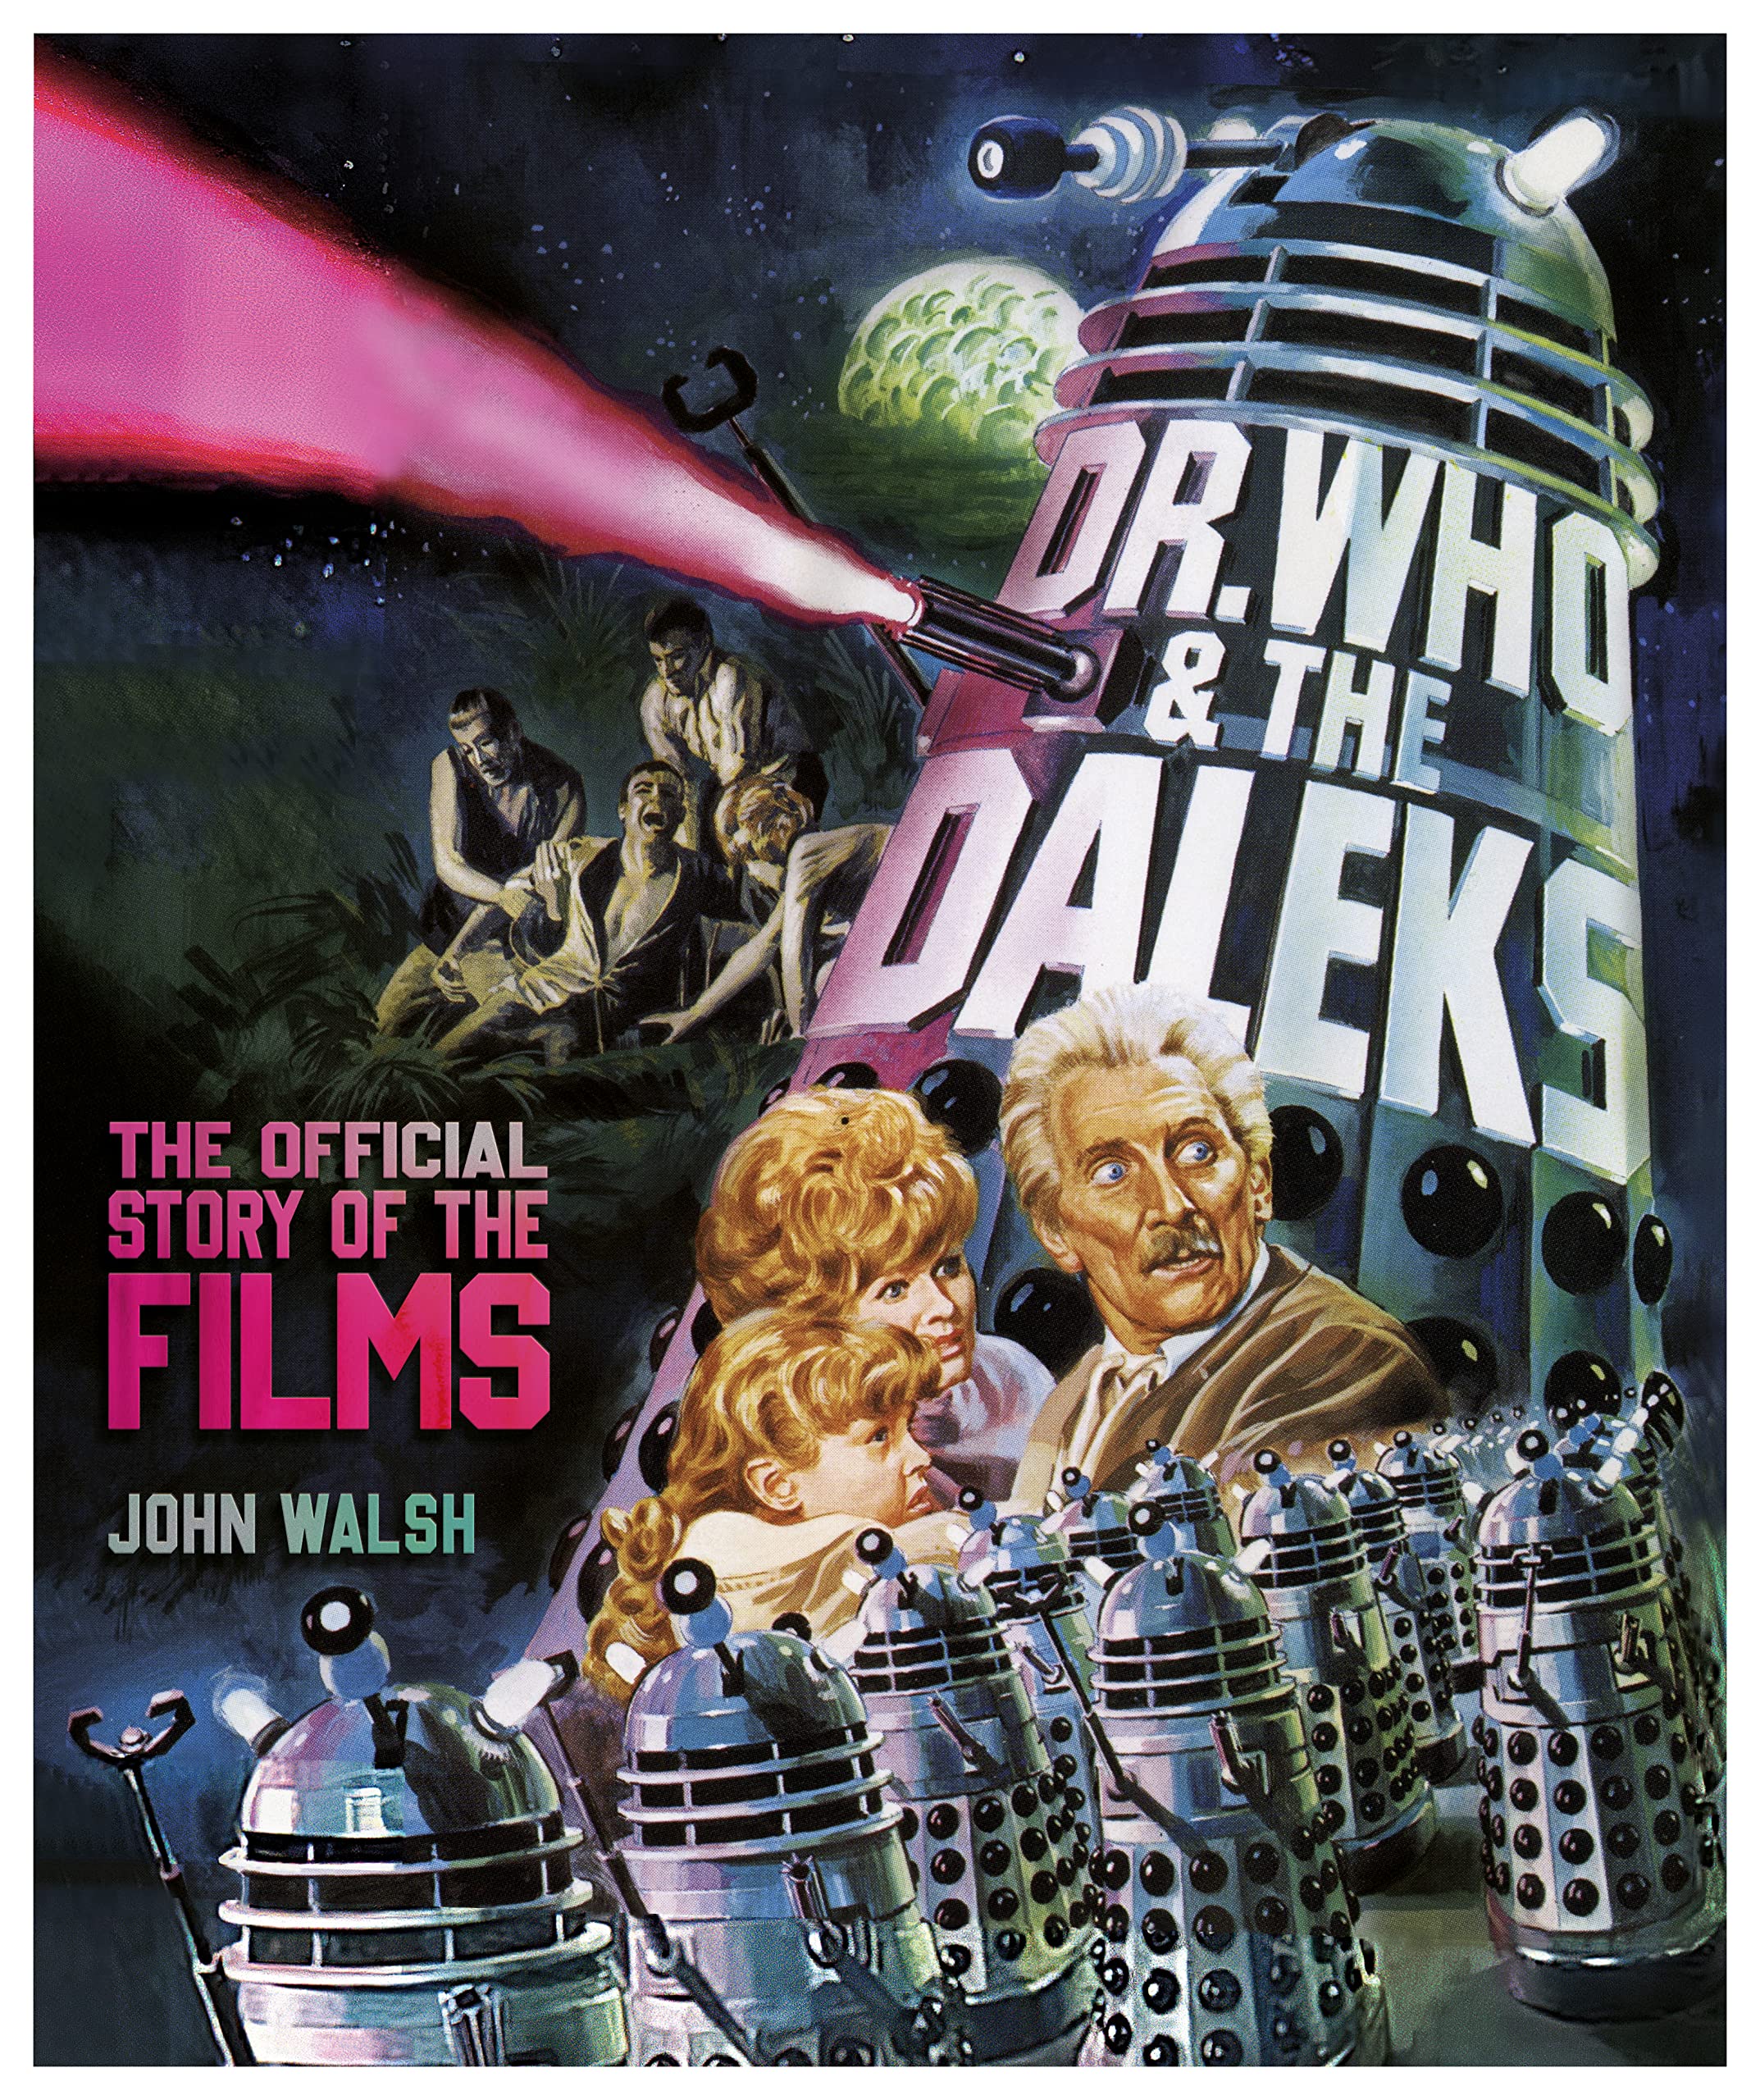 DR WHO AND THE DALEKS: THE OFFICIAL STORY OF THE FILMS